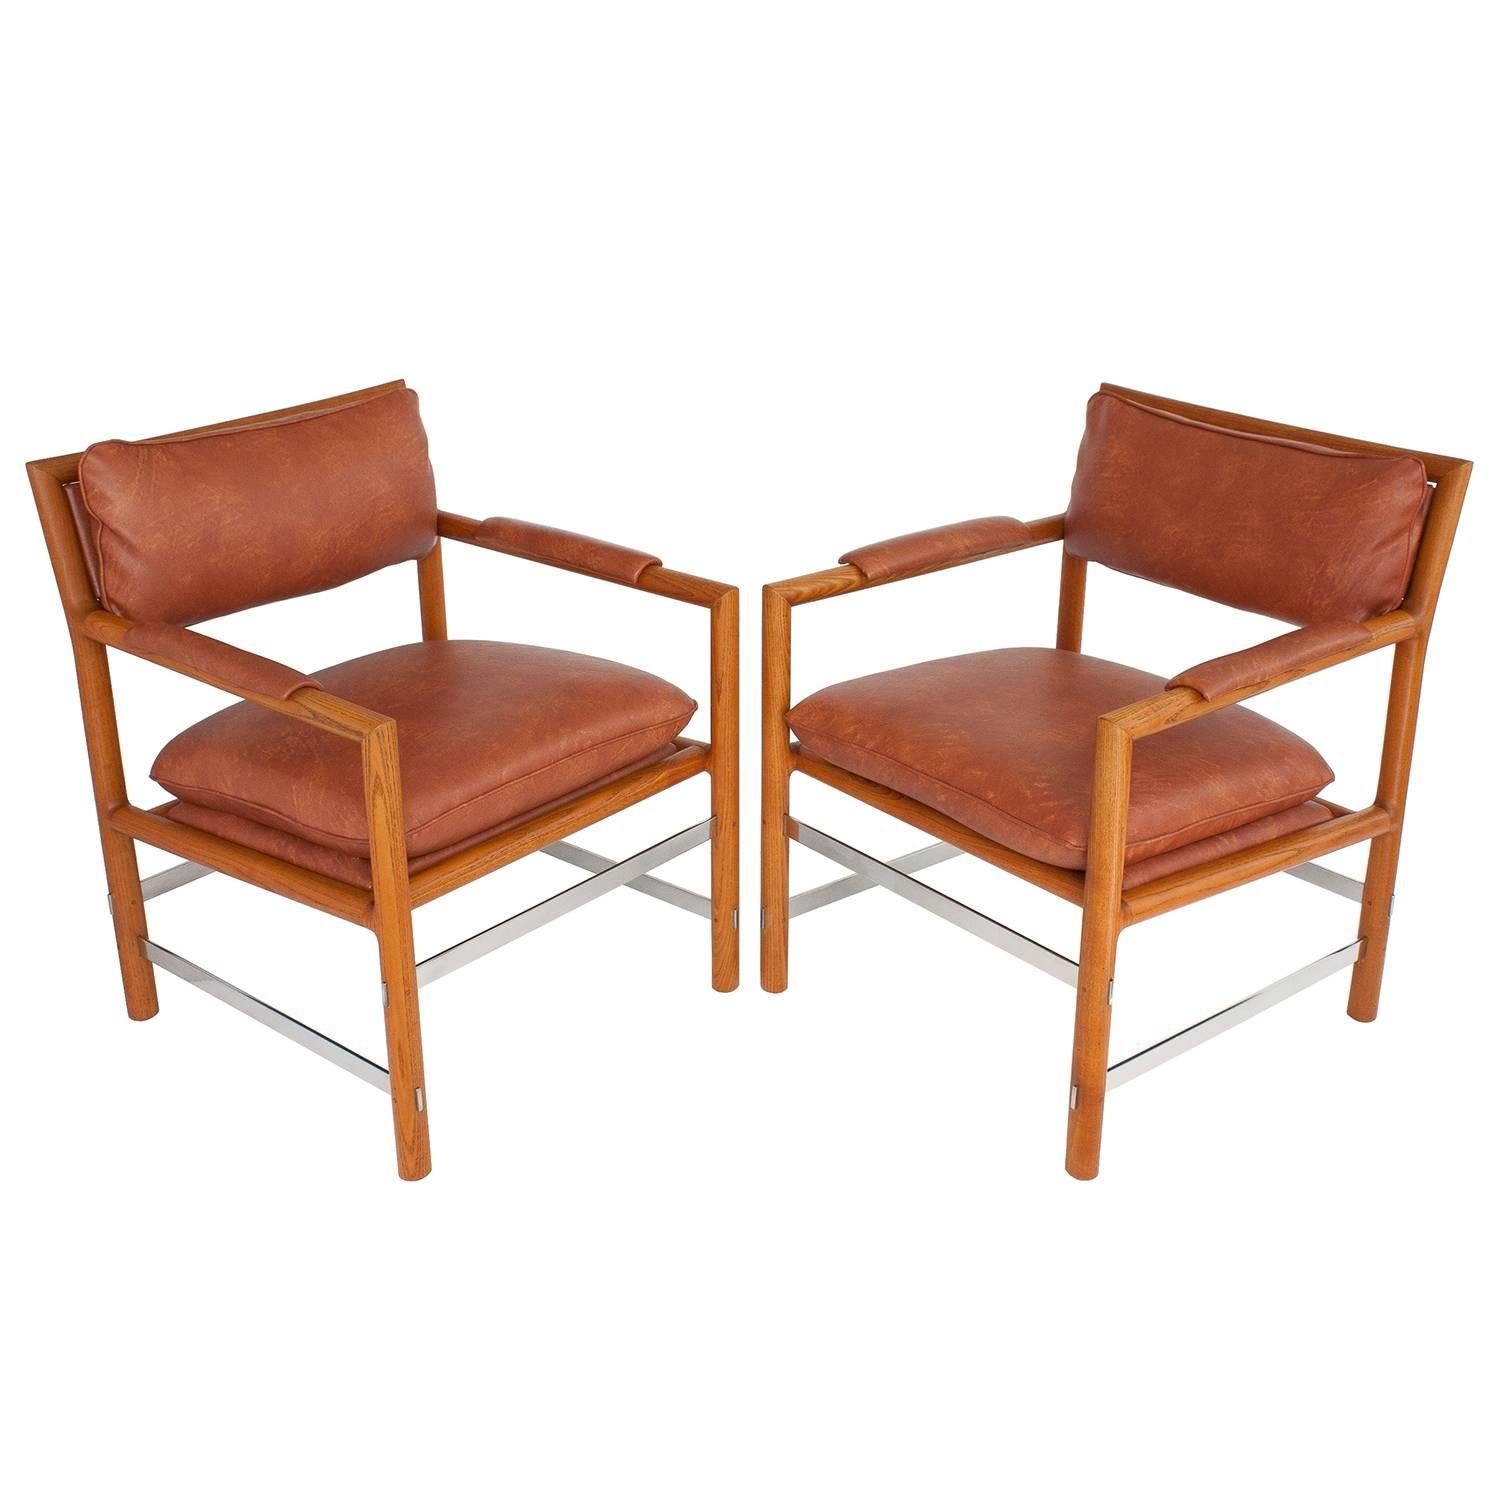 Pair of "Edward's Chairs" by Edward Wormley for Dunbar